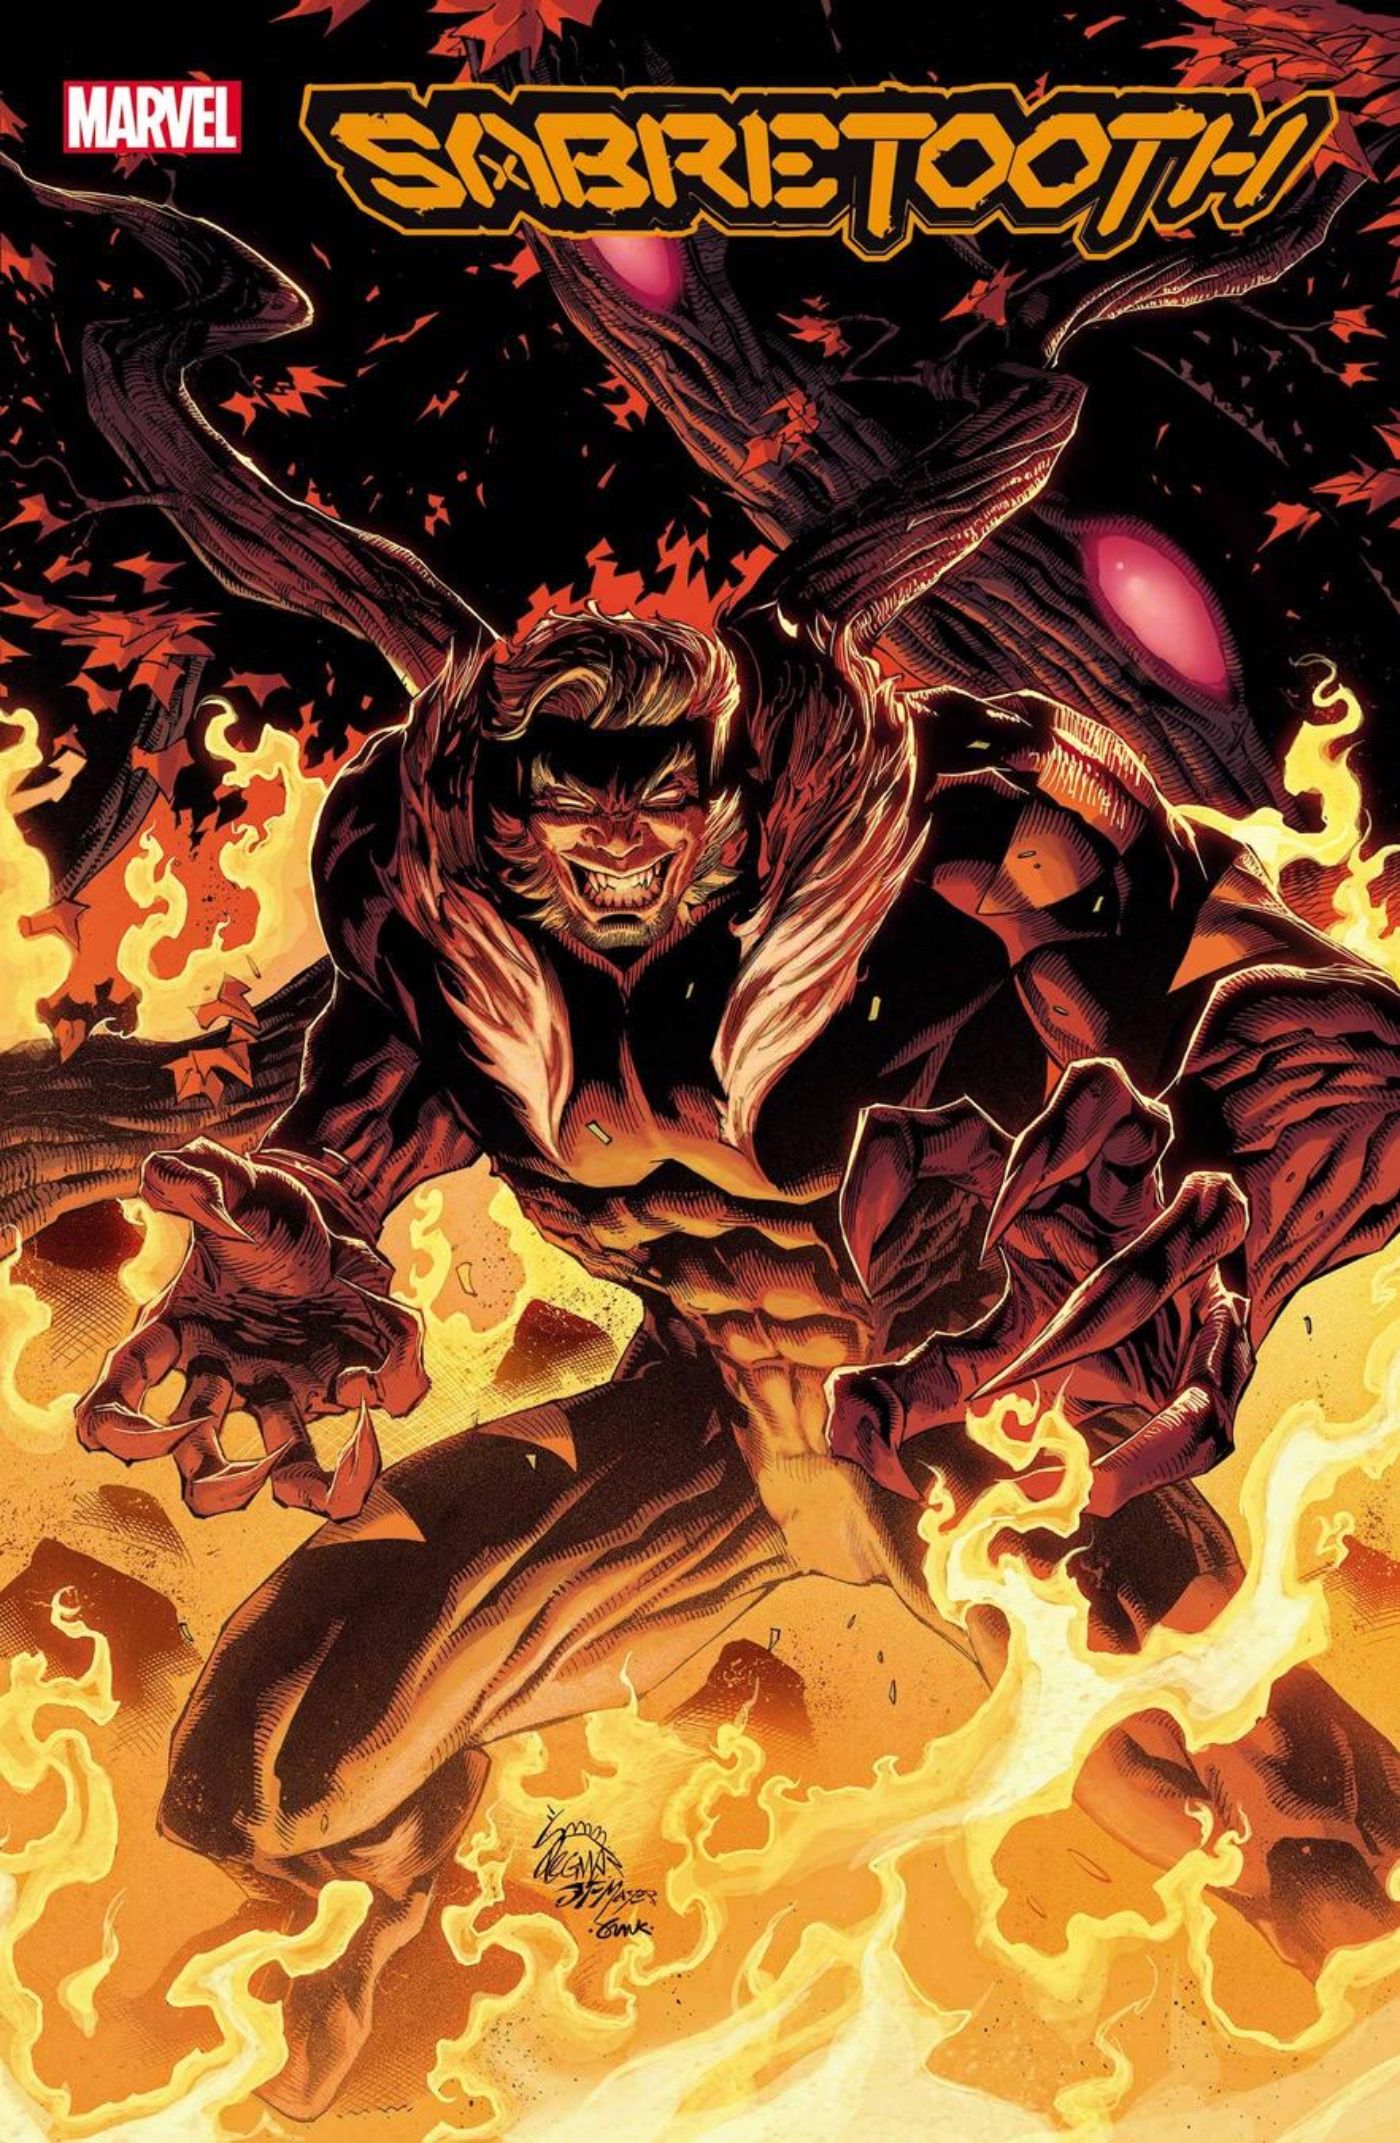 Sabretooth cover, showing Sabretooth in Hell